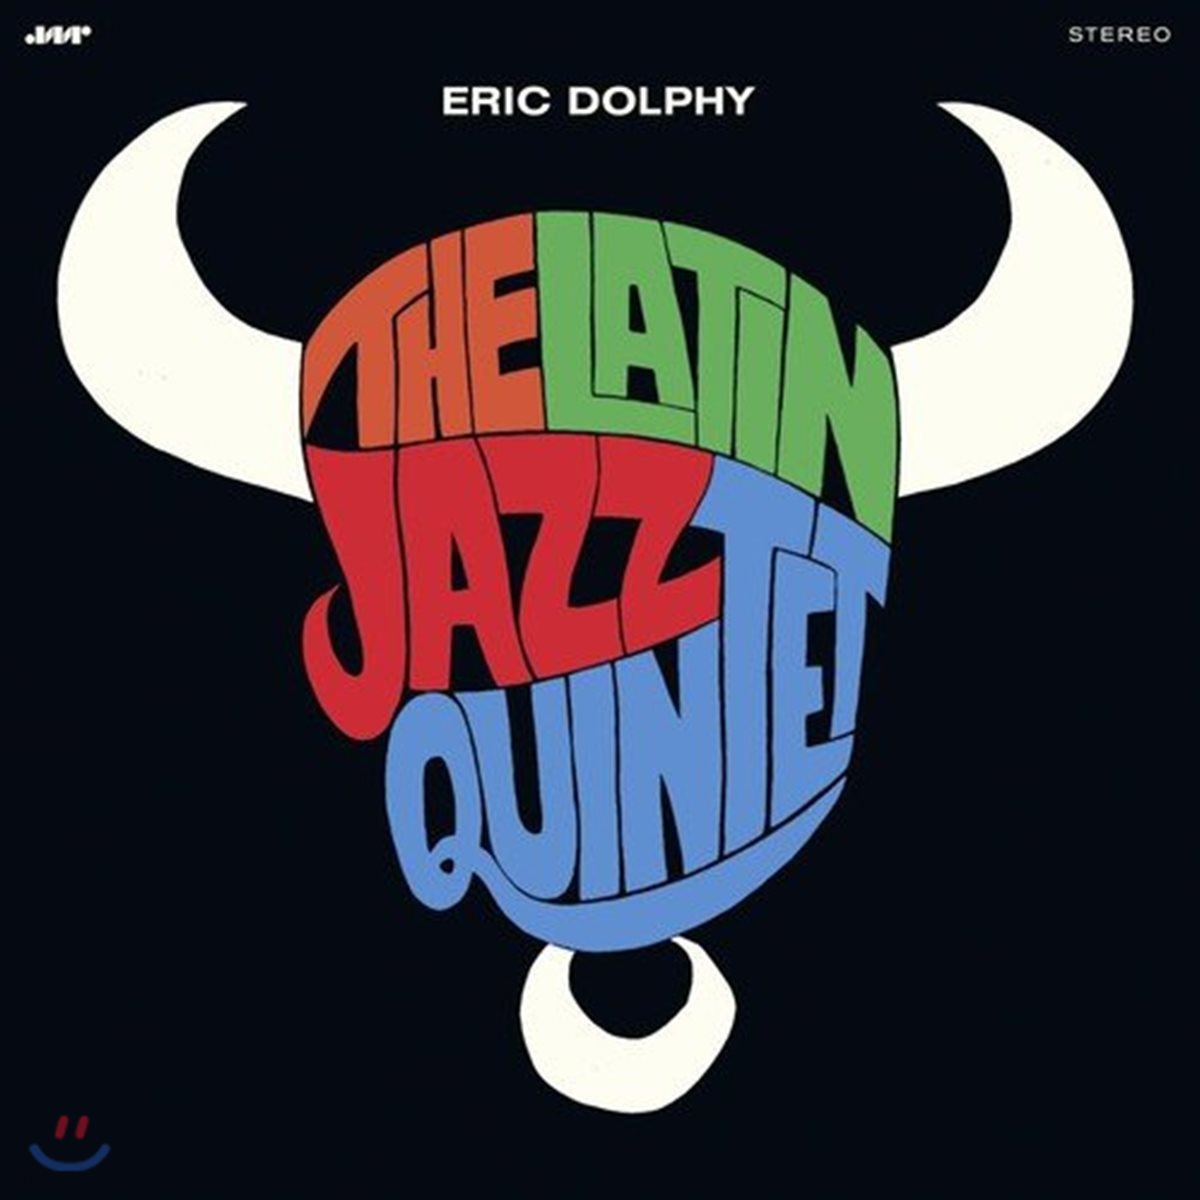 Eric Dolphy (에릭 돌피) - Eric Dolphy & The Latin Jazz Quintet [LP]